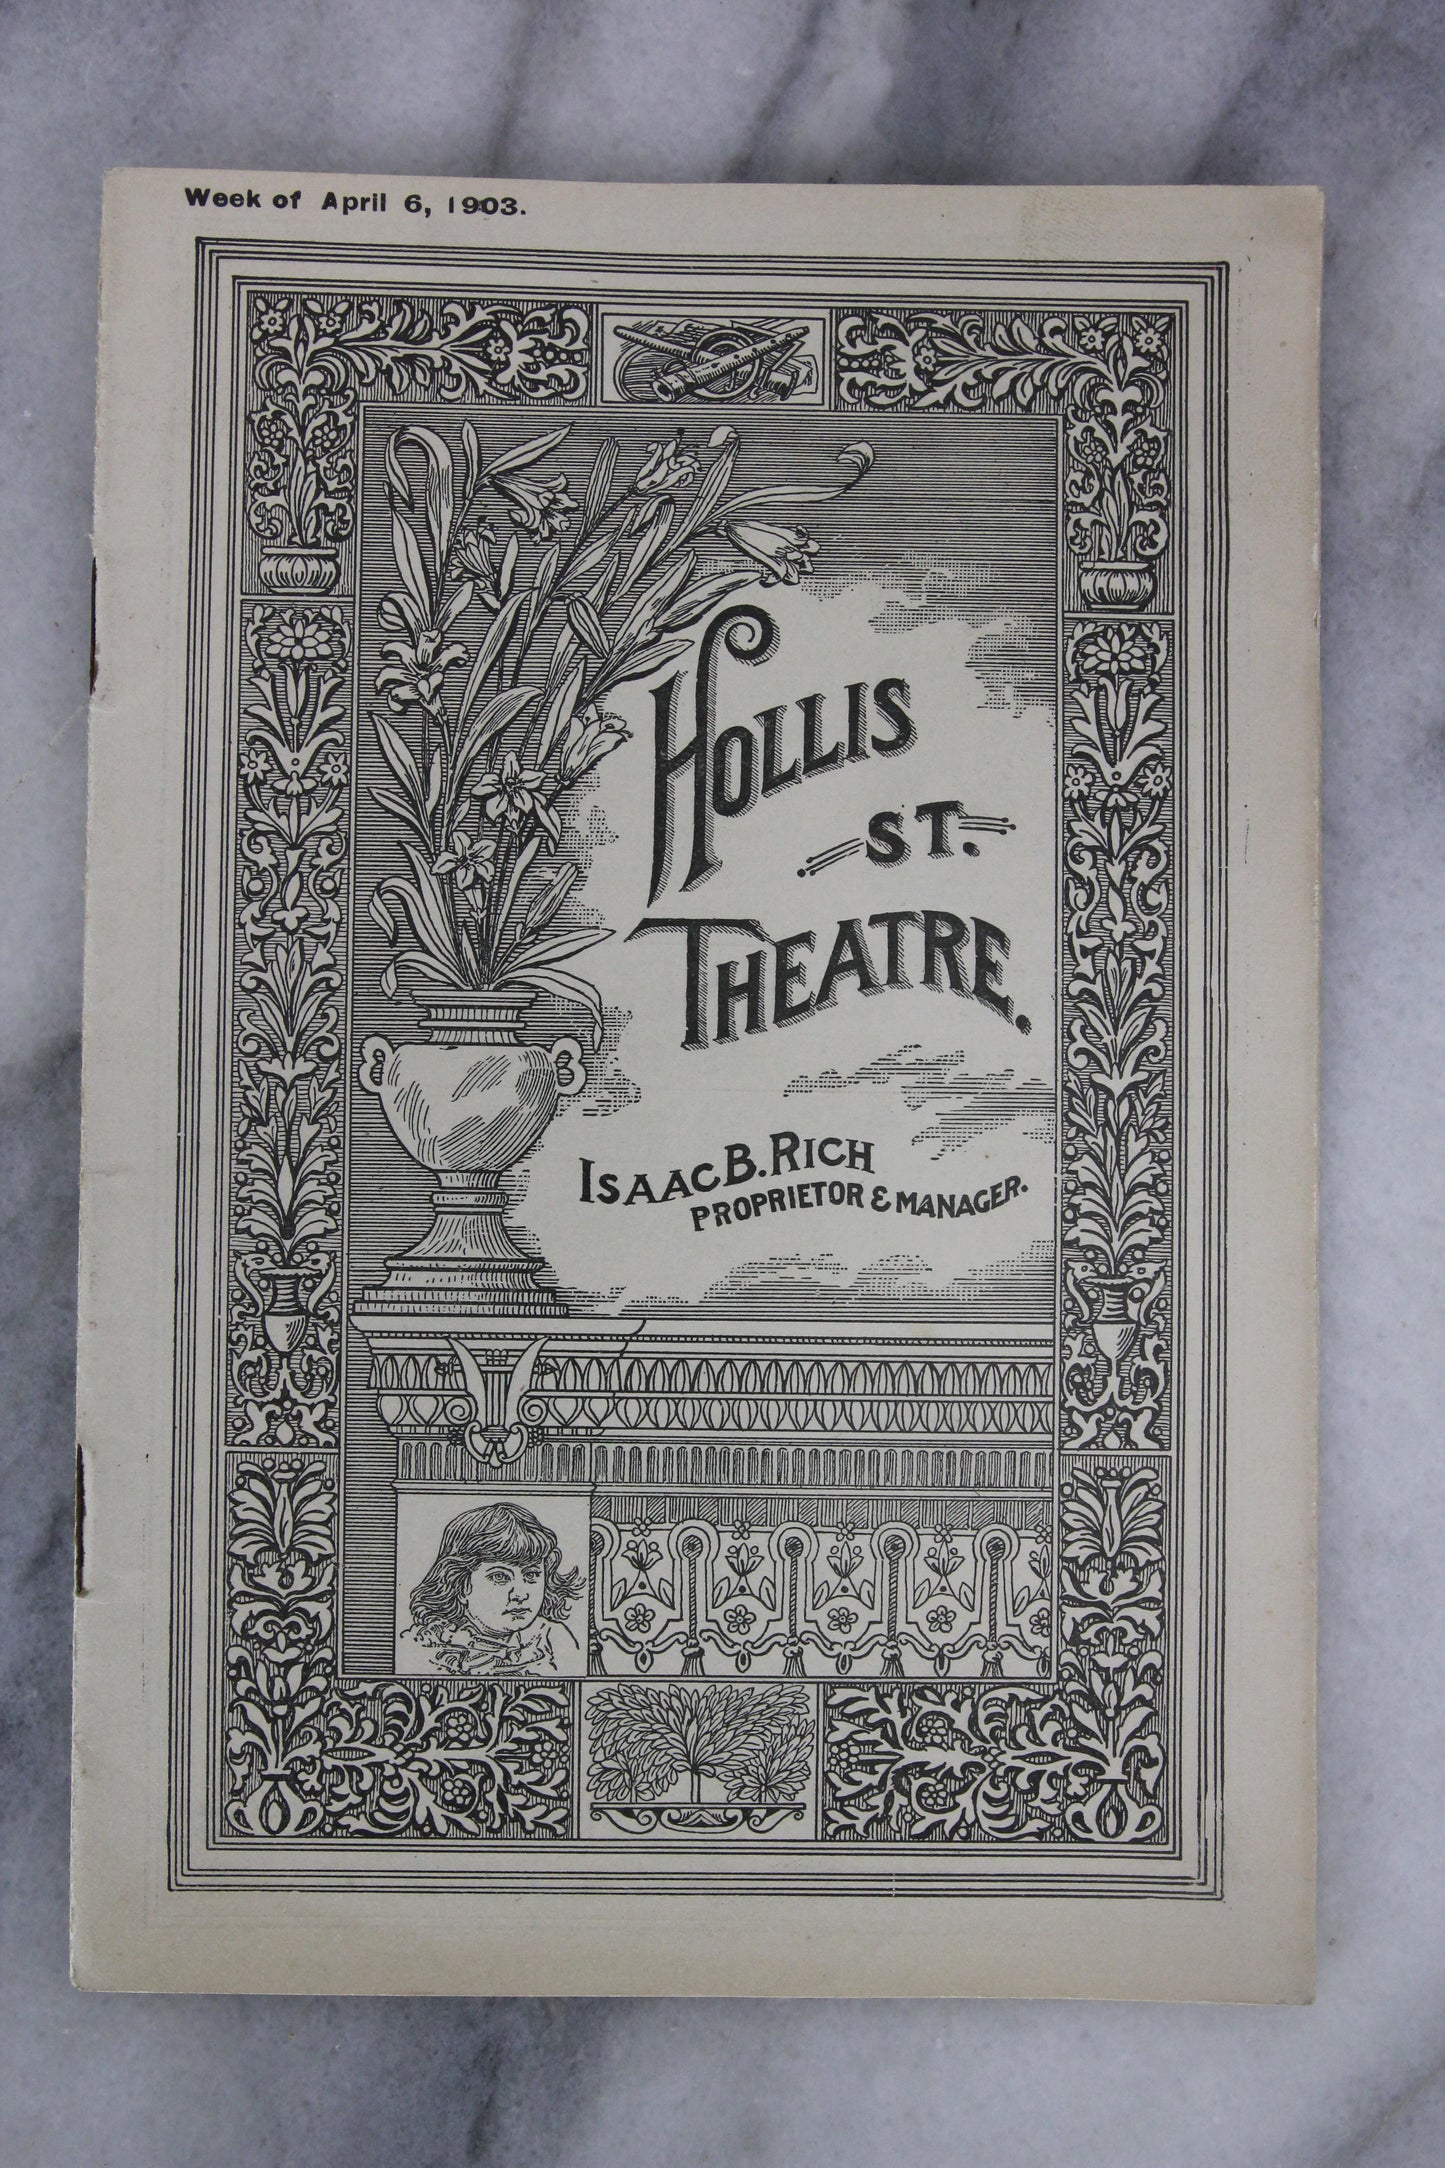 Antique Playbill from Hollis St. Theatre, Boston, Week of April 6, 1903 - Featuring Cecil B. De Mille in Hamlet